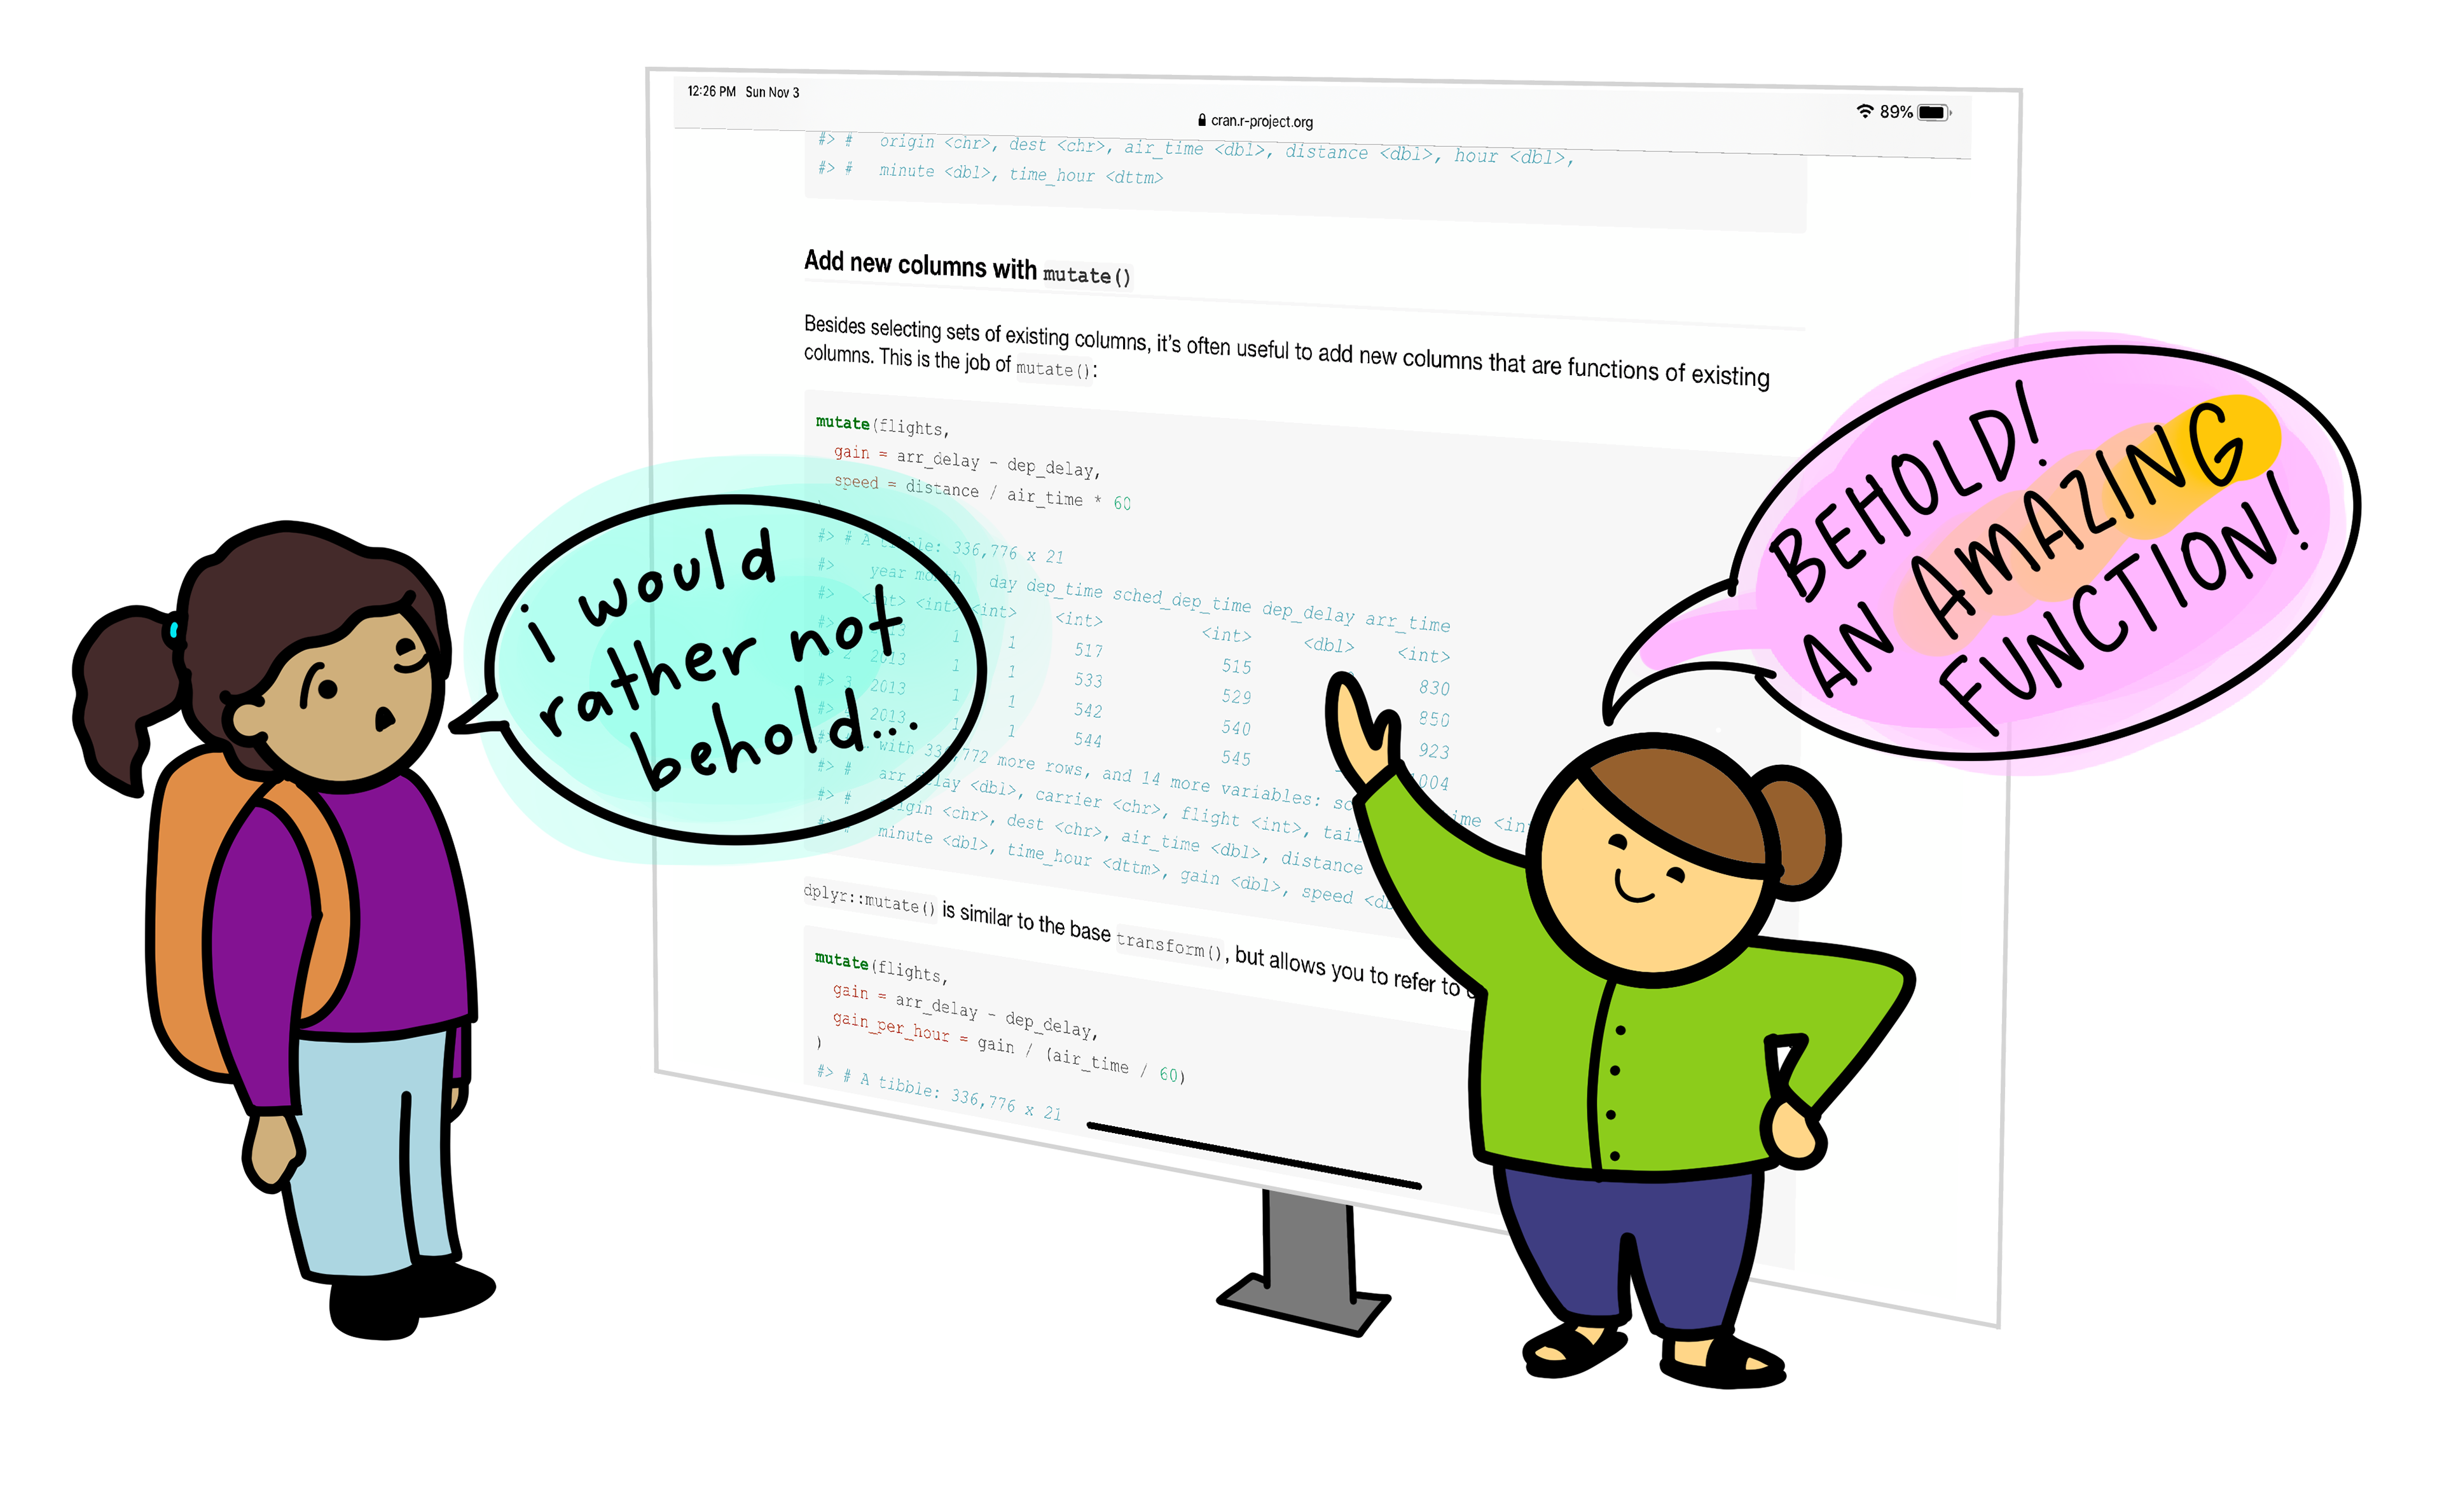 Drawing of two people, the first proundly displays a screen full of code while saying  “Behold an Amazing Function!”. The second person looks a bit scared and replies  “I would rather not behold...”.